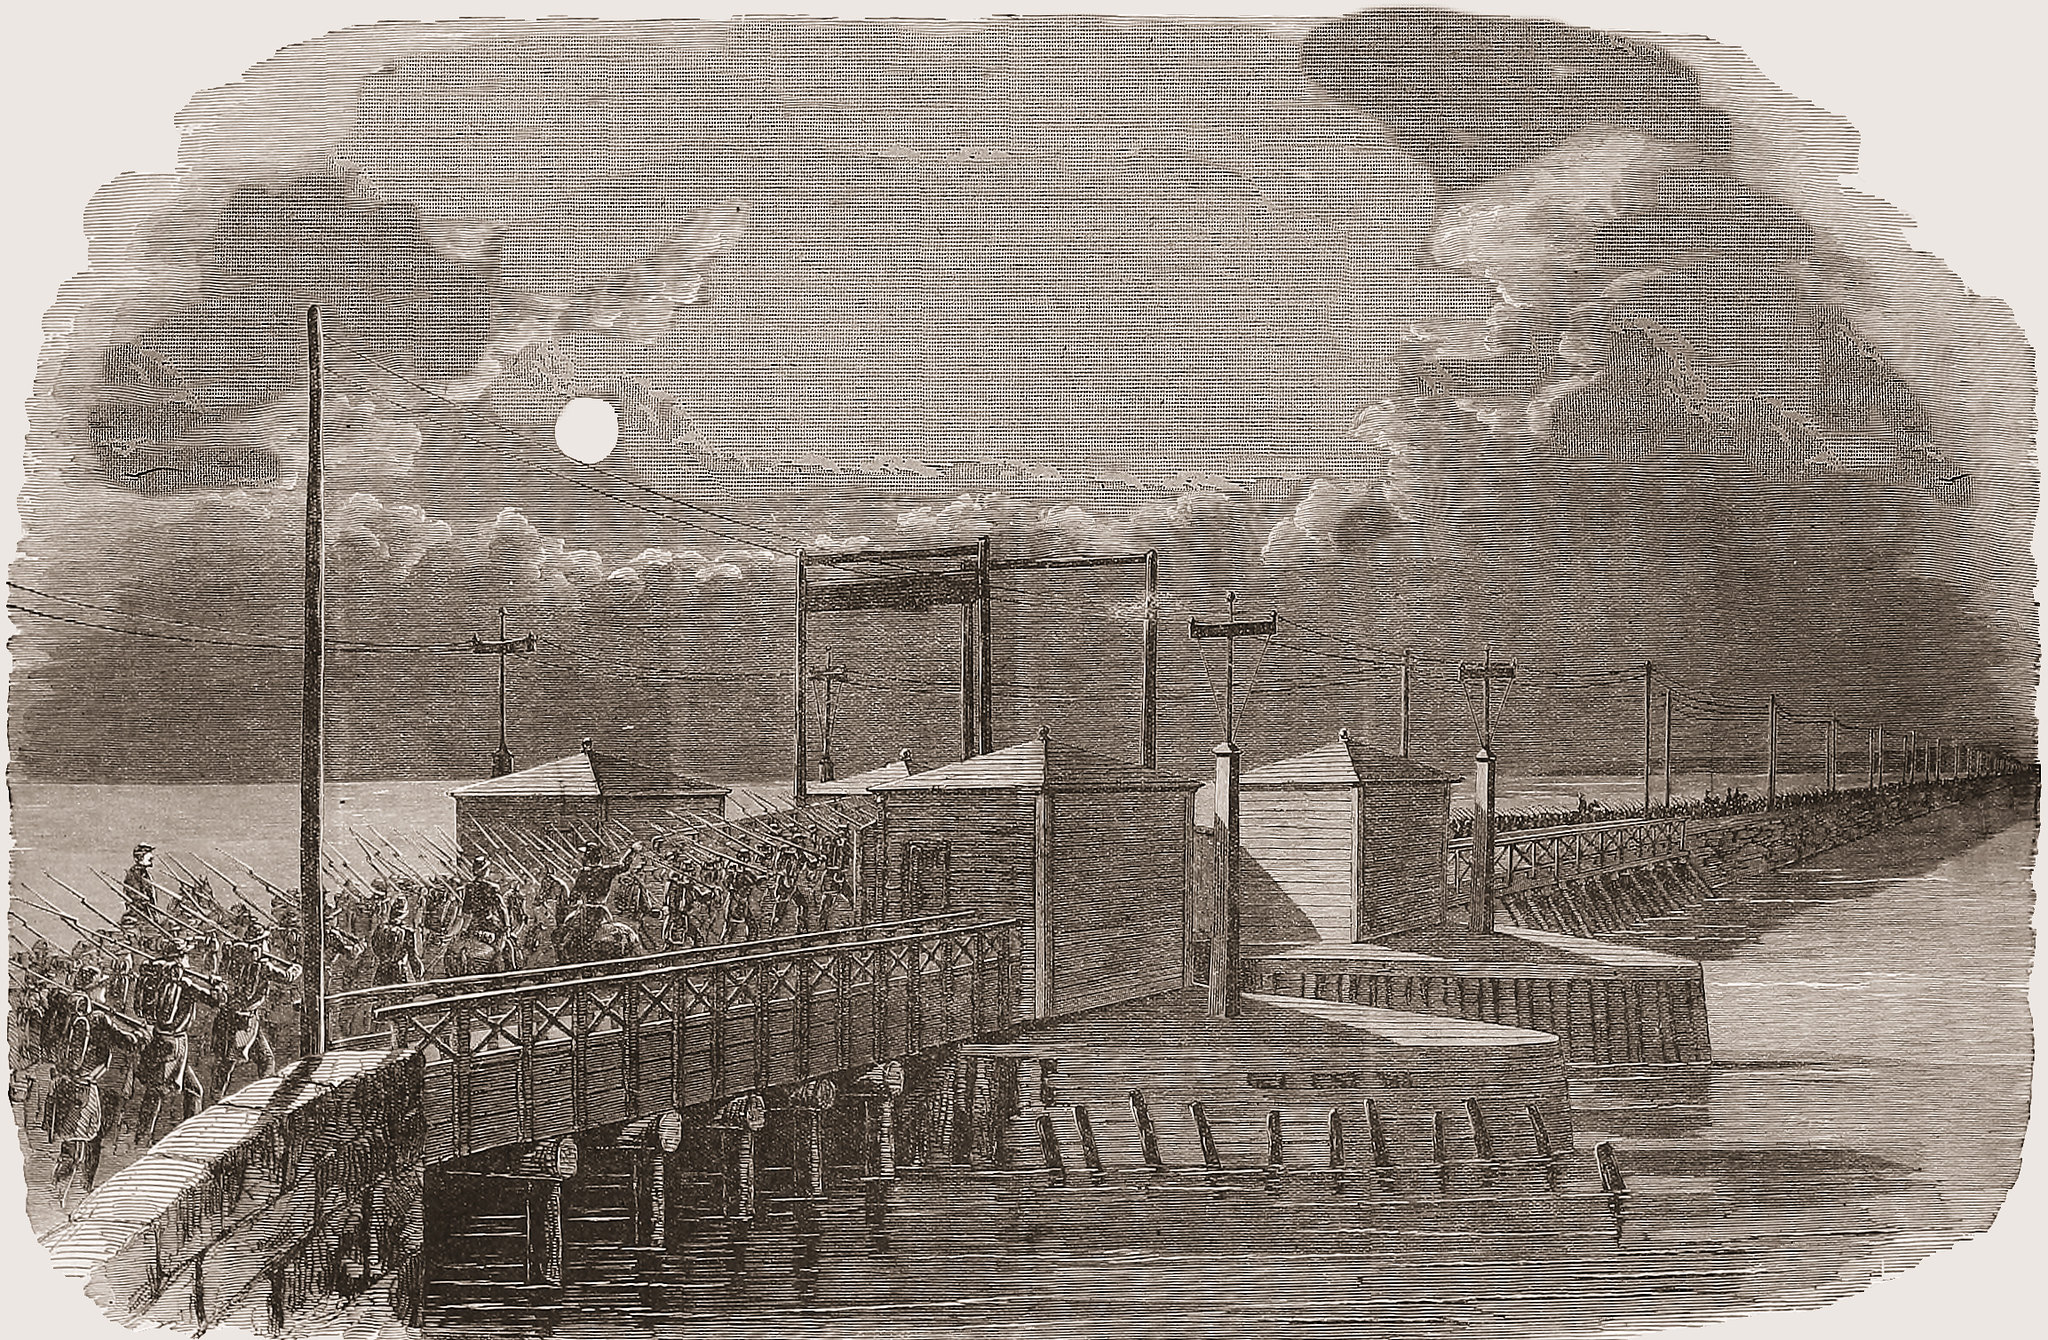 The Advance Guard of the Army of the United States Crossing the Long Bridge Over the Potomac, May 24, 1861